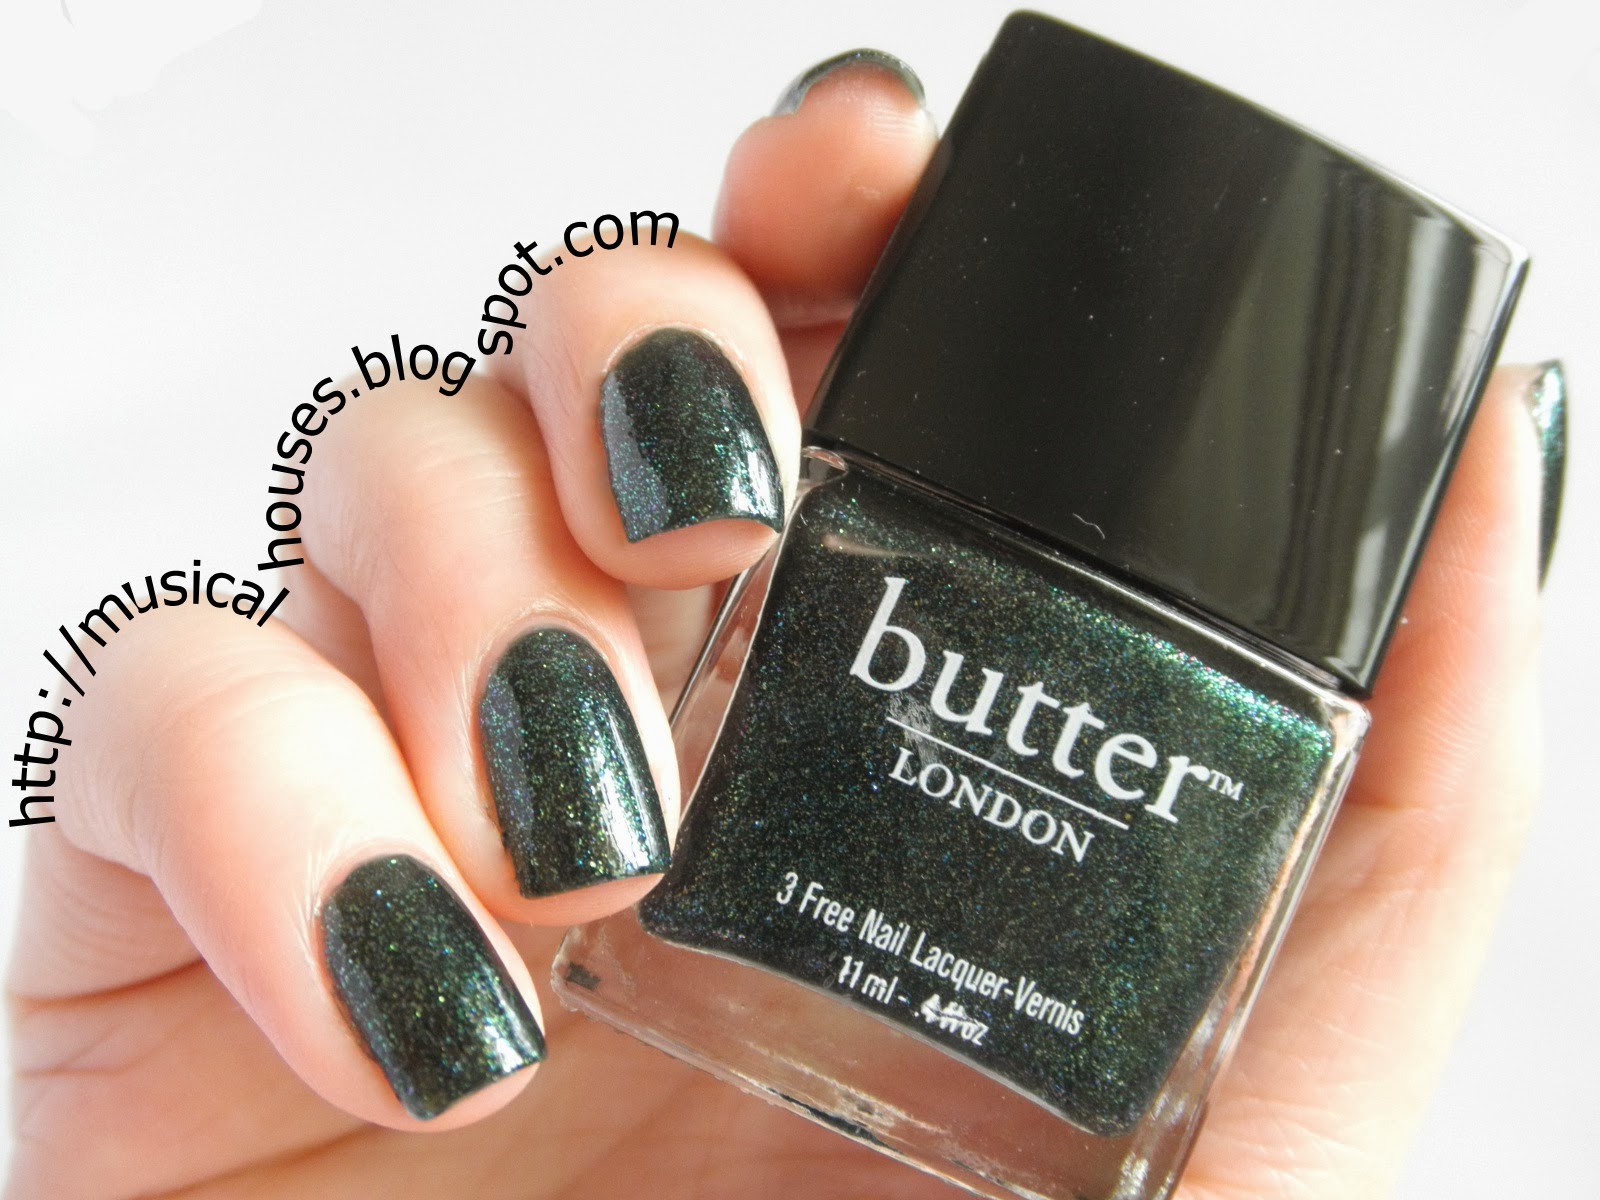 7. Butter London Patent Shine 10X Nail Lacquer in "Ruby Murray" - wide 2